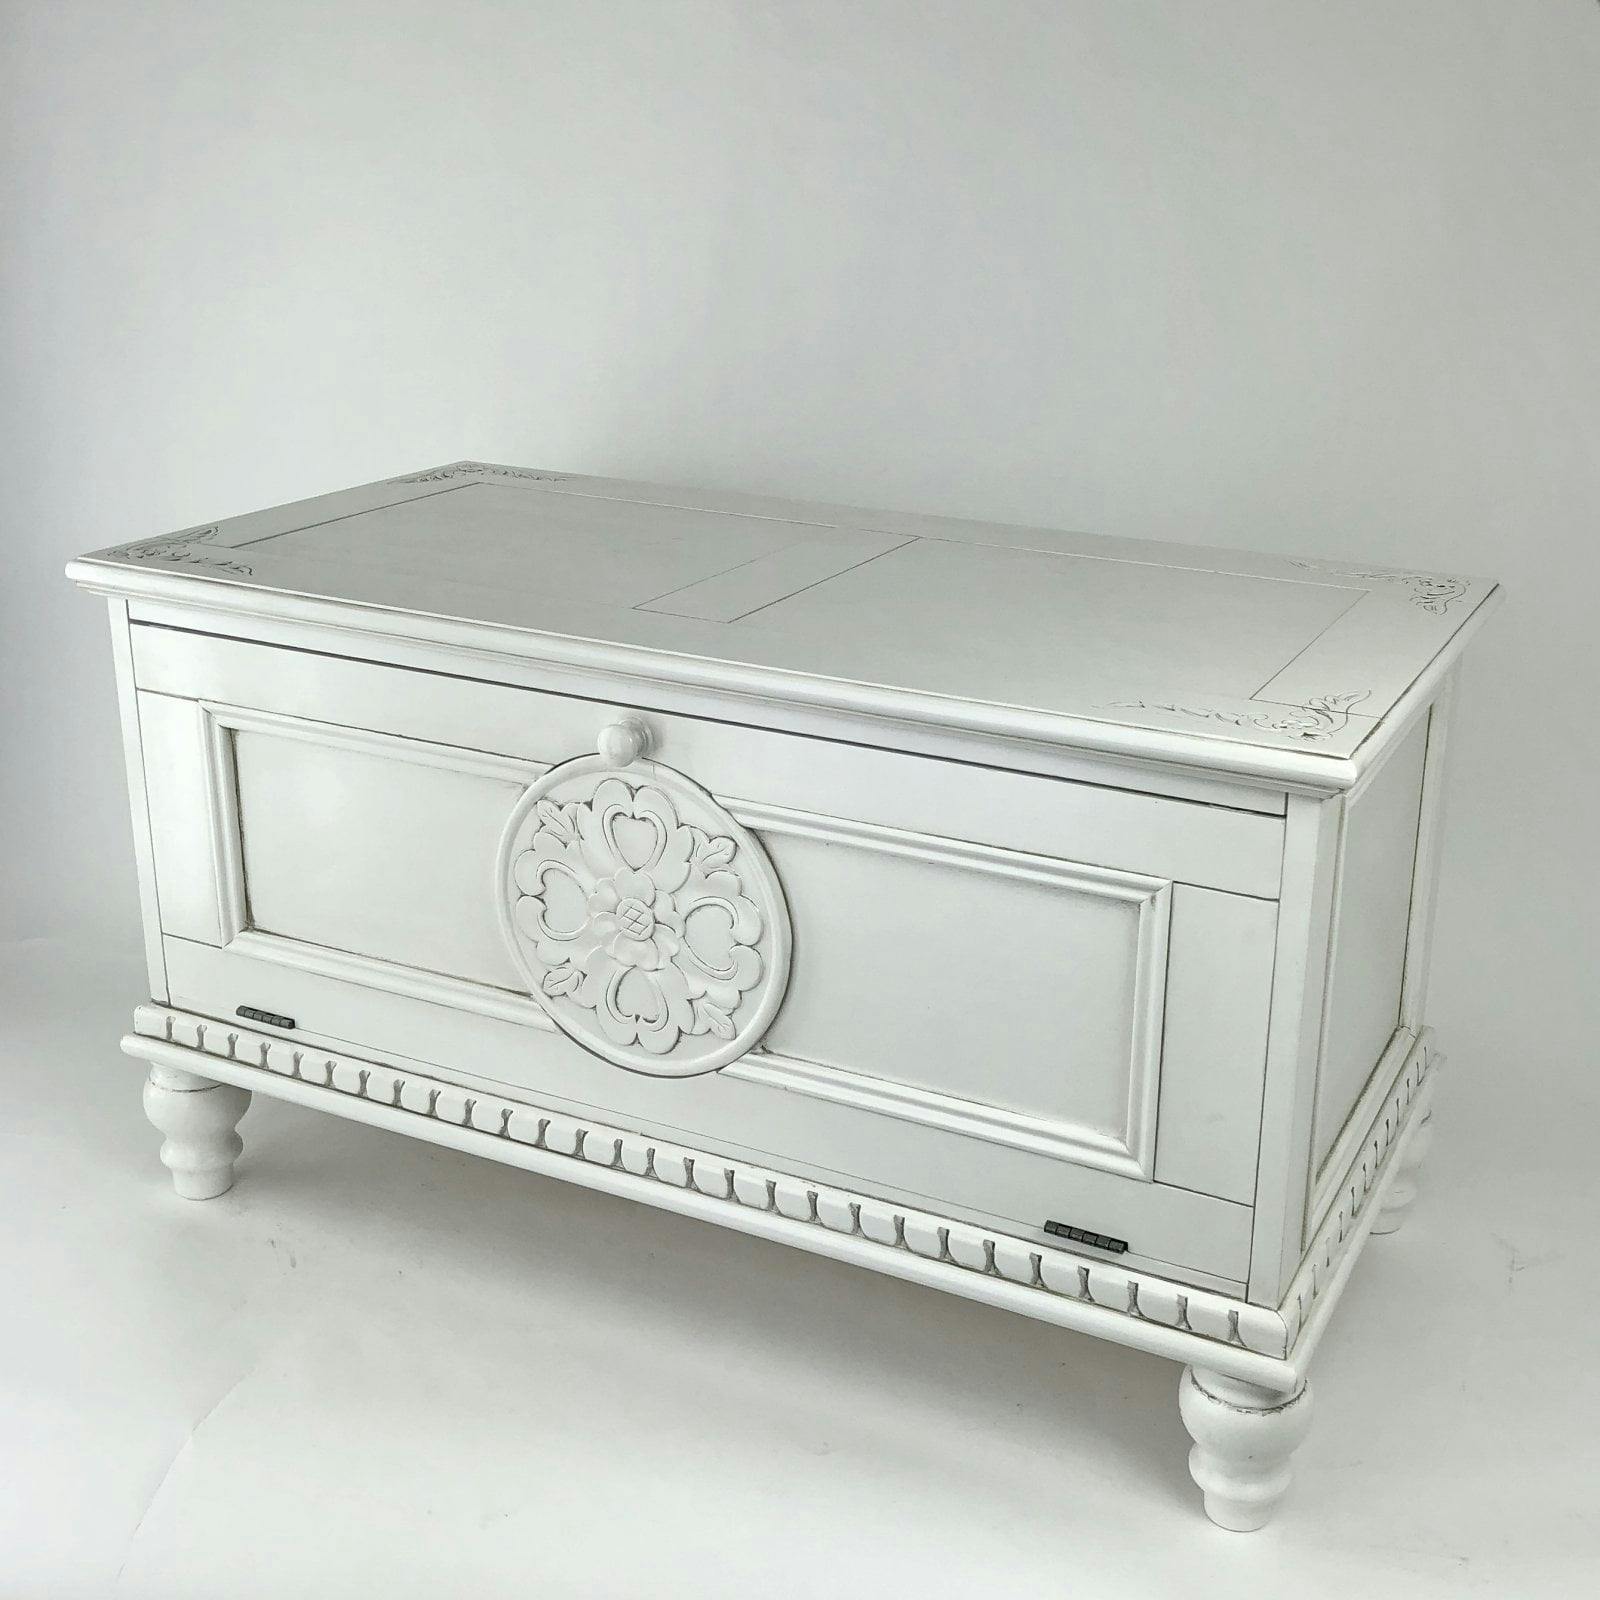 Elegant White Birchwood Accent Chest with Floral Carving and Storage